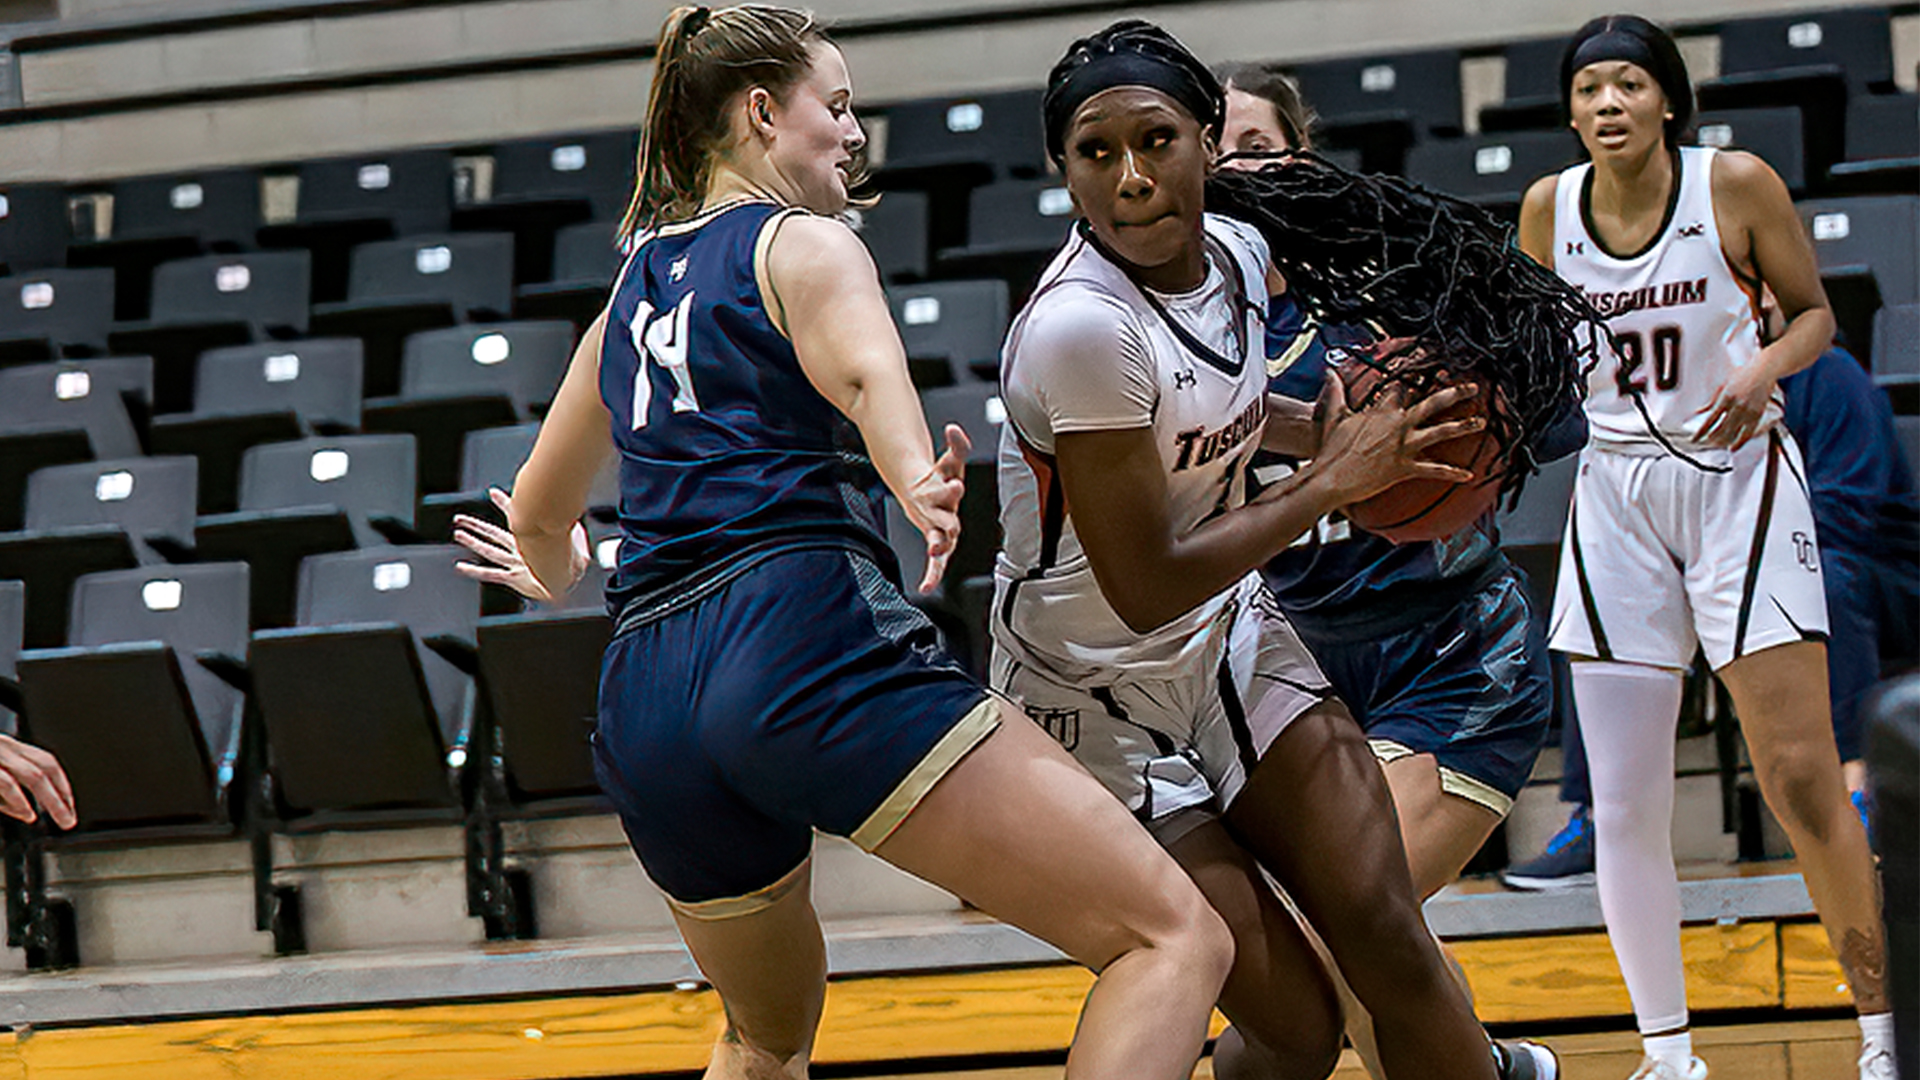 Cheremond nets career-high 24, but Pioneers tumble to unbeaten Wingate 66-62